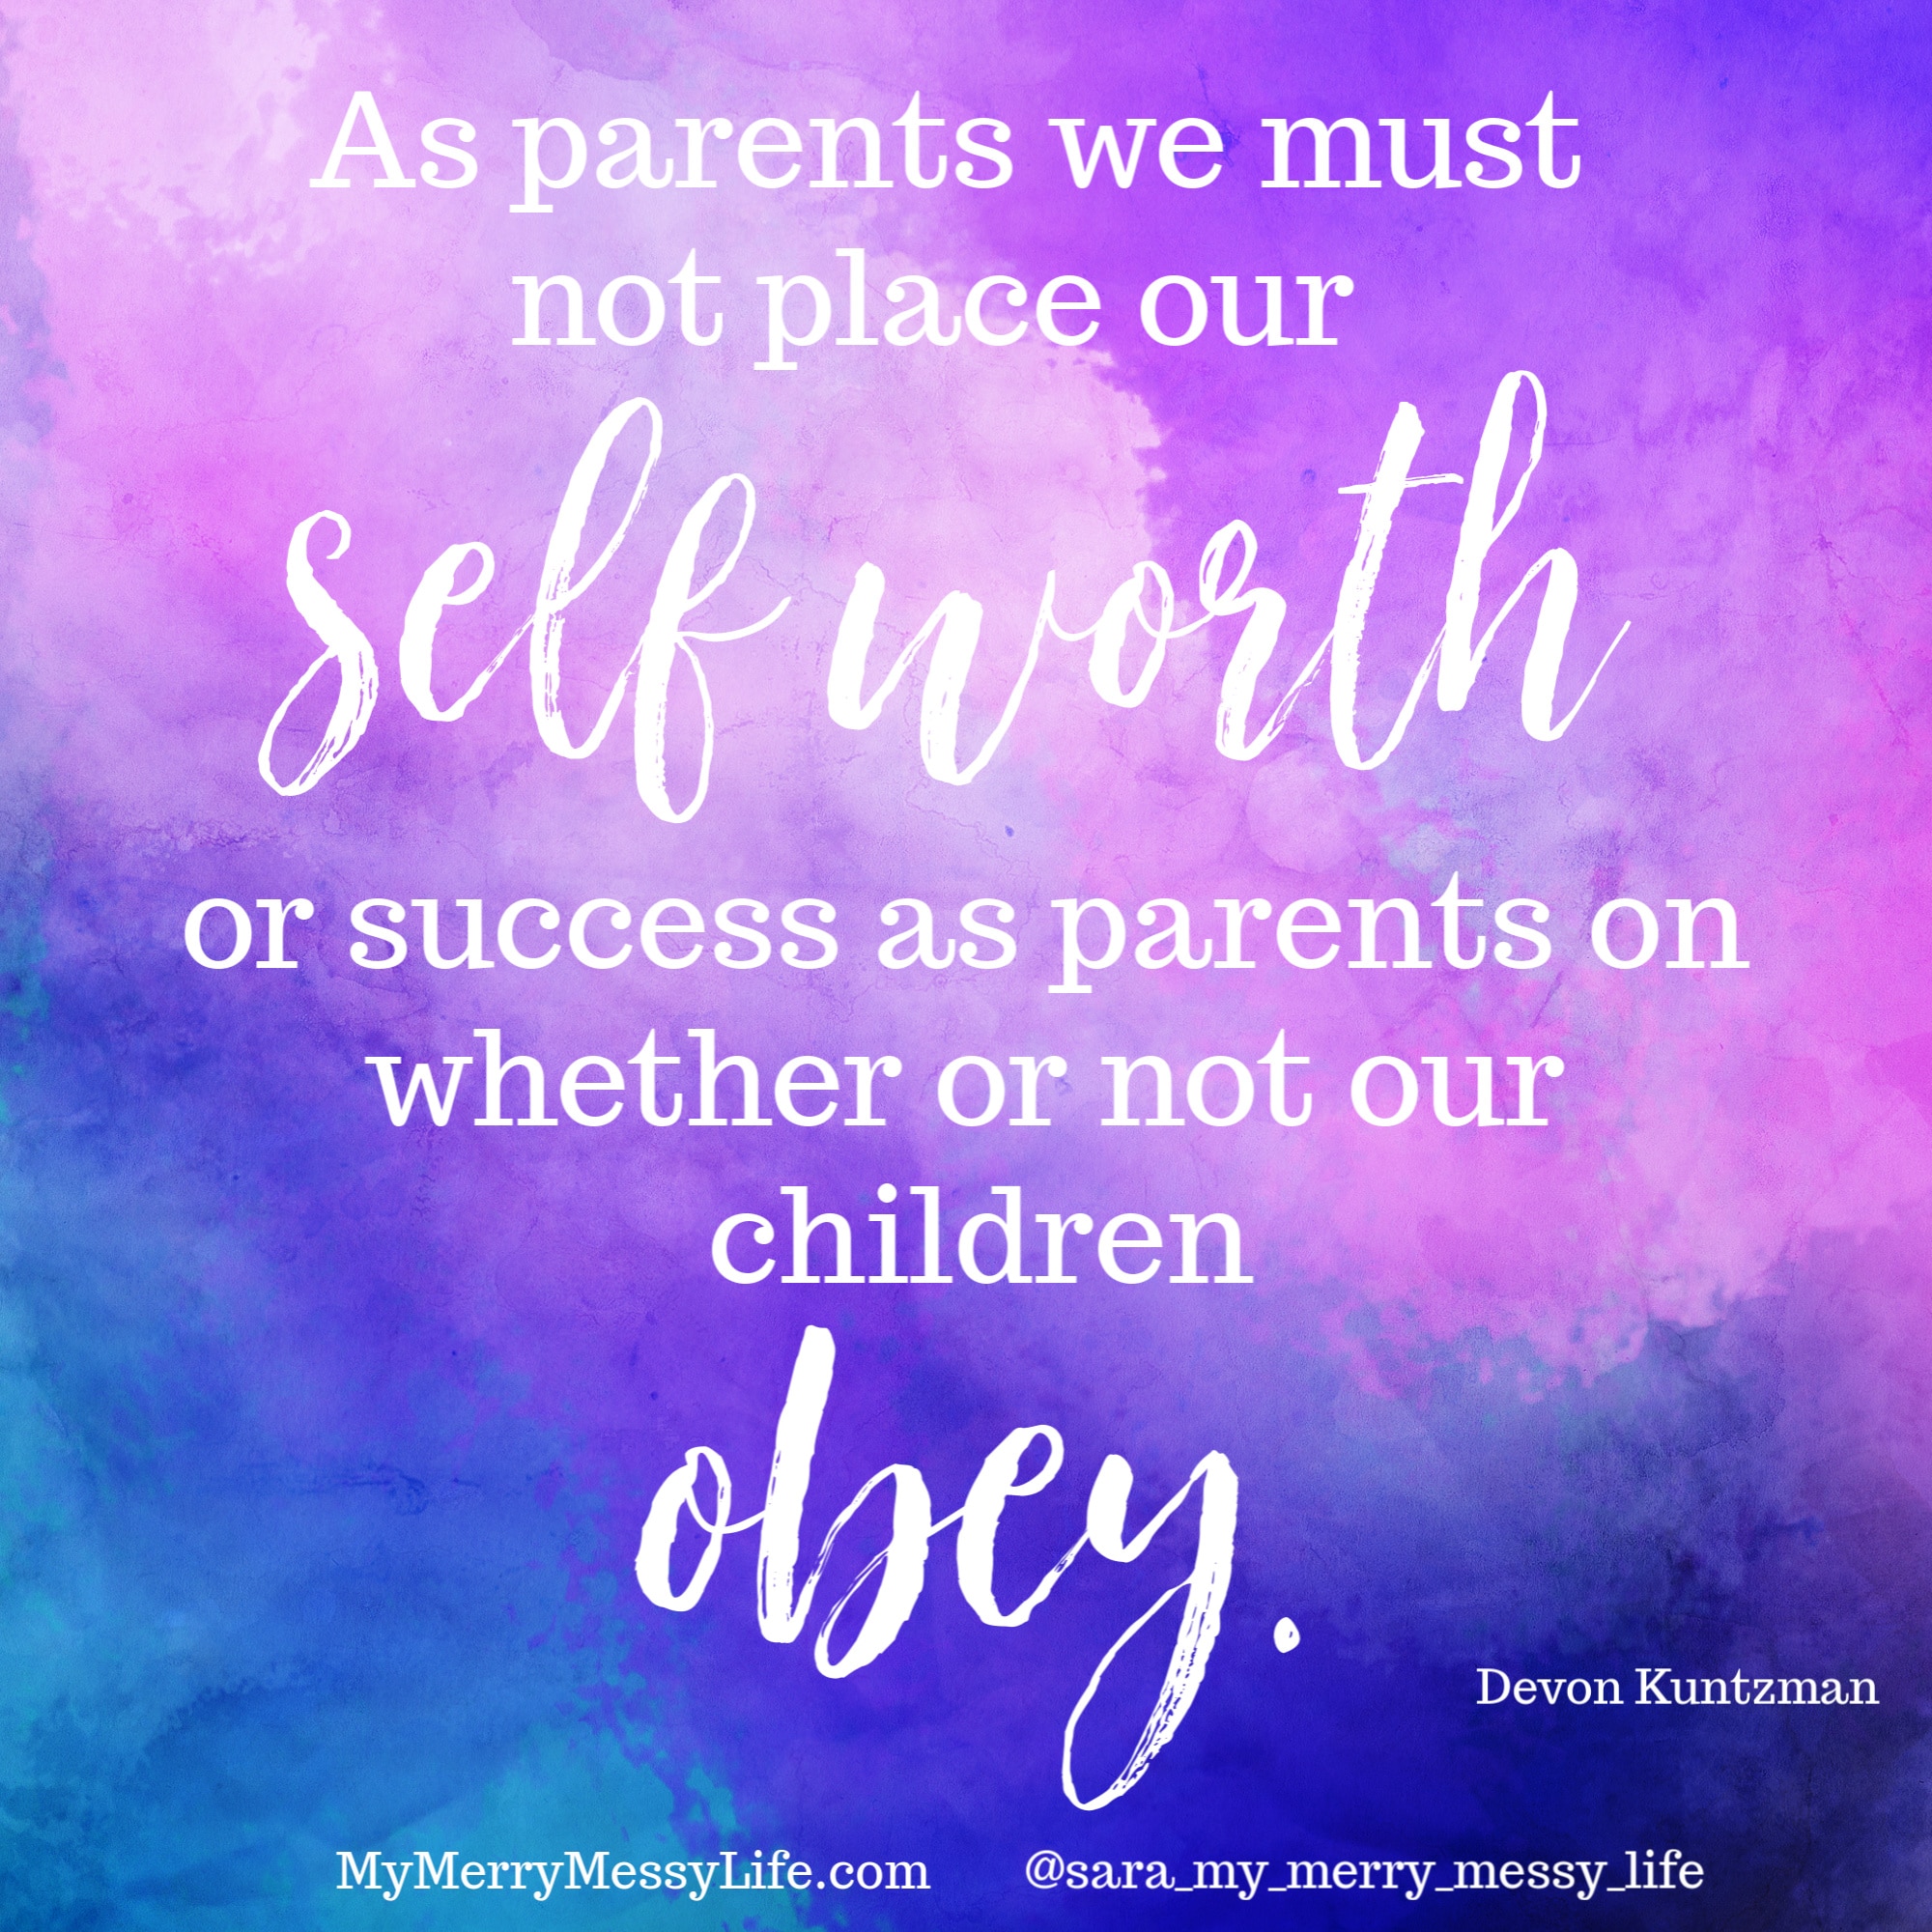 As parents we must not place our self worth or success as parents on whether or not our children obey. - Devon Kuntzman